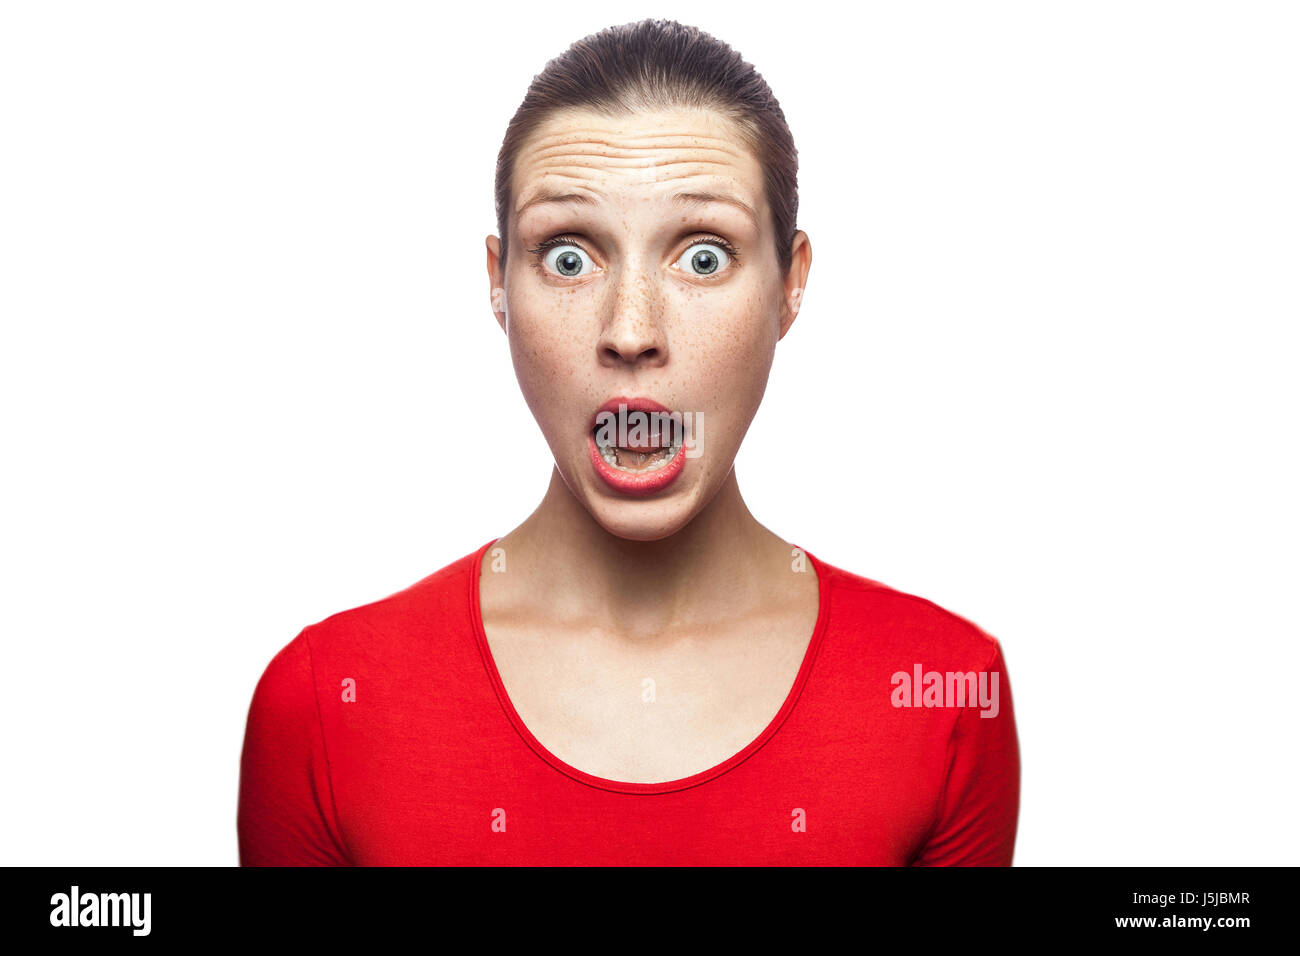 Portrait of happy surprised woman in red t-shirt with freckles. looking at camera excited with big eyes, studio shot. isolated on white background. Stock Photo